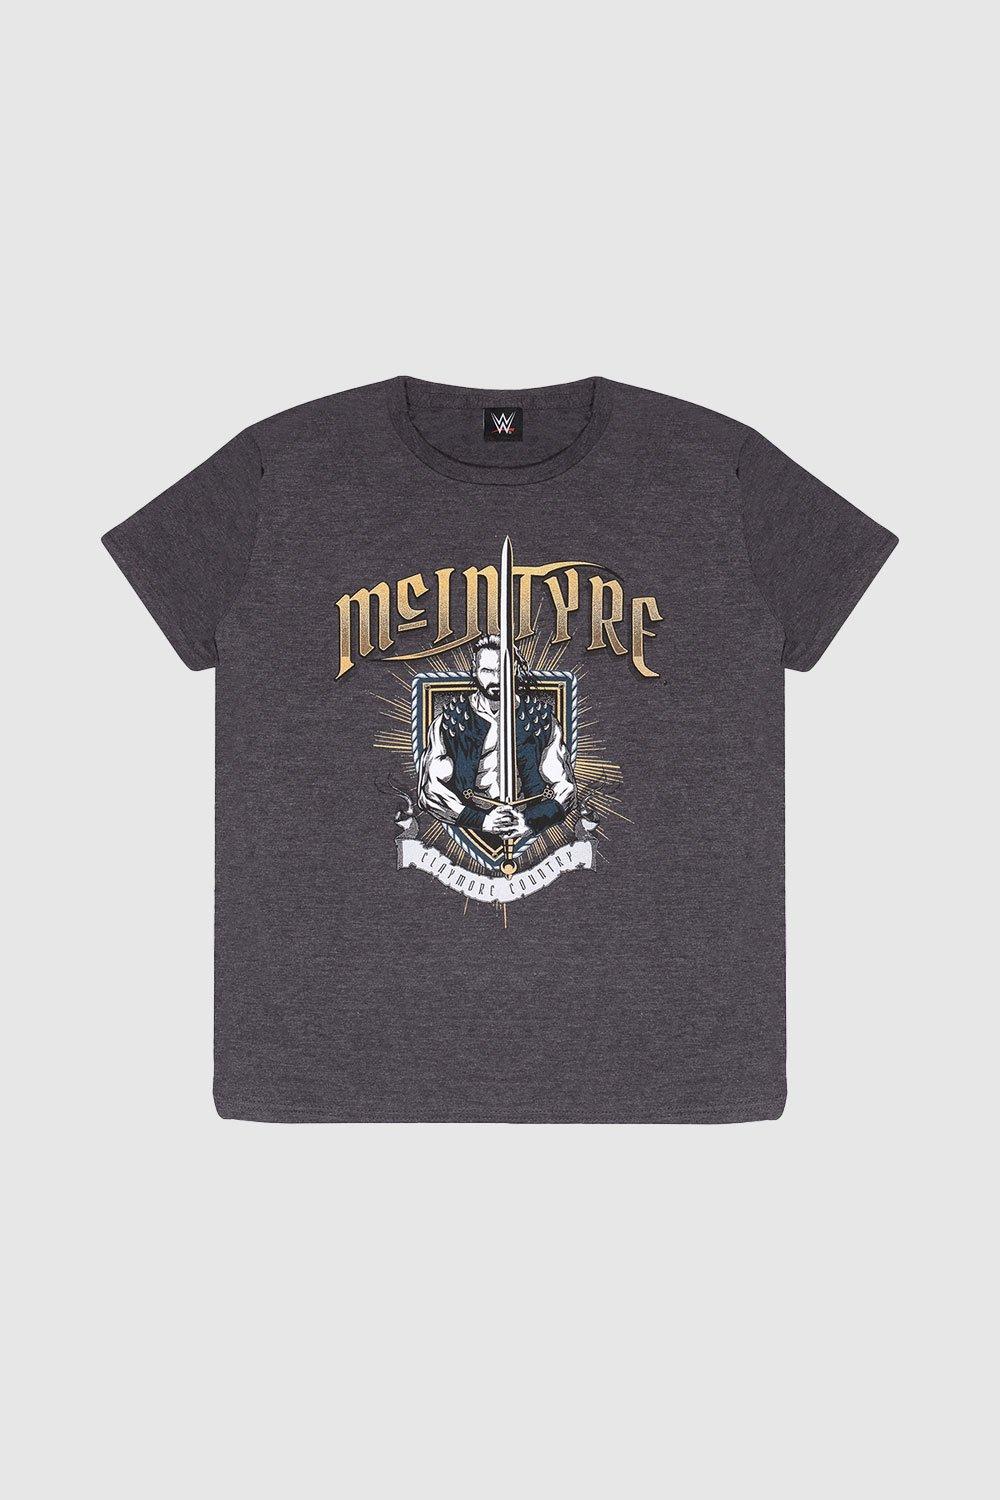 Drew McIntyre Claymore Country Crest T-Shirt